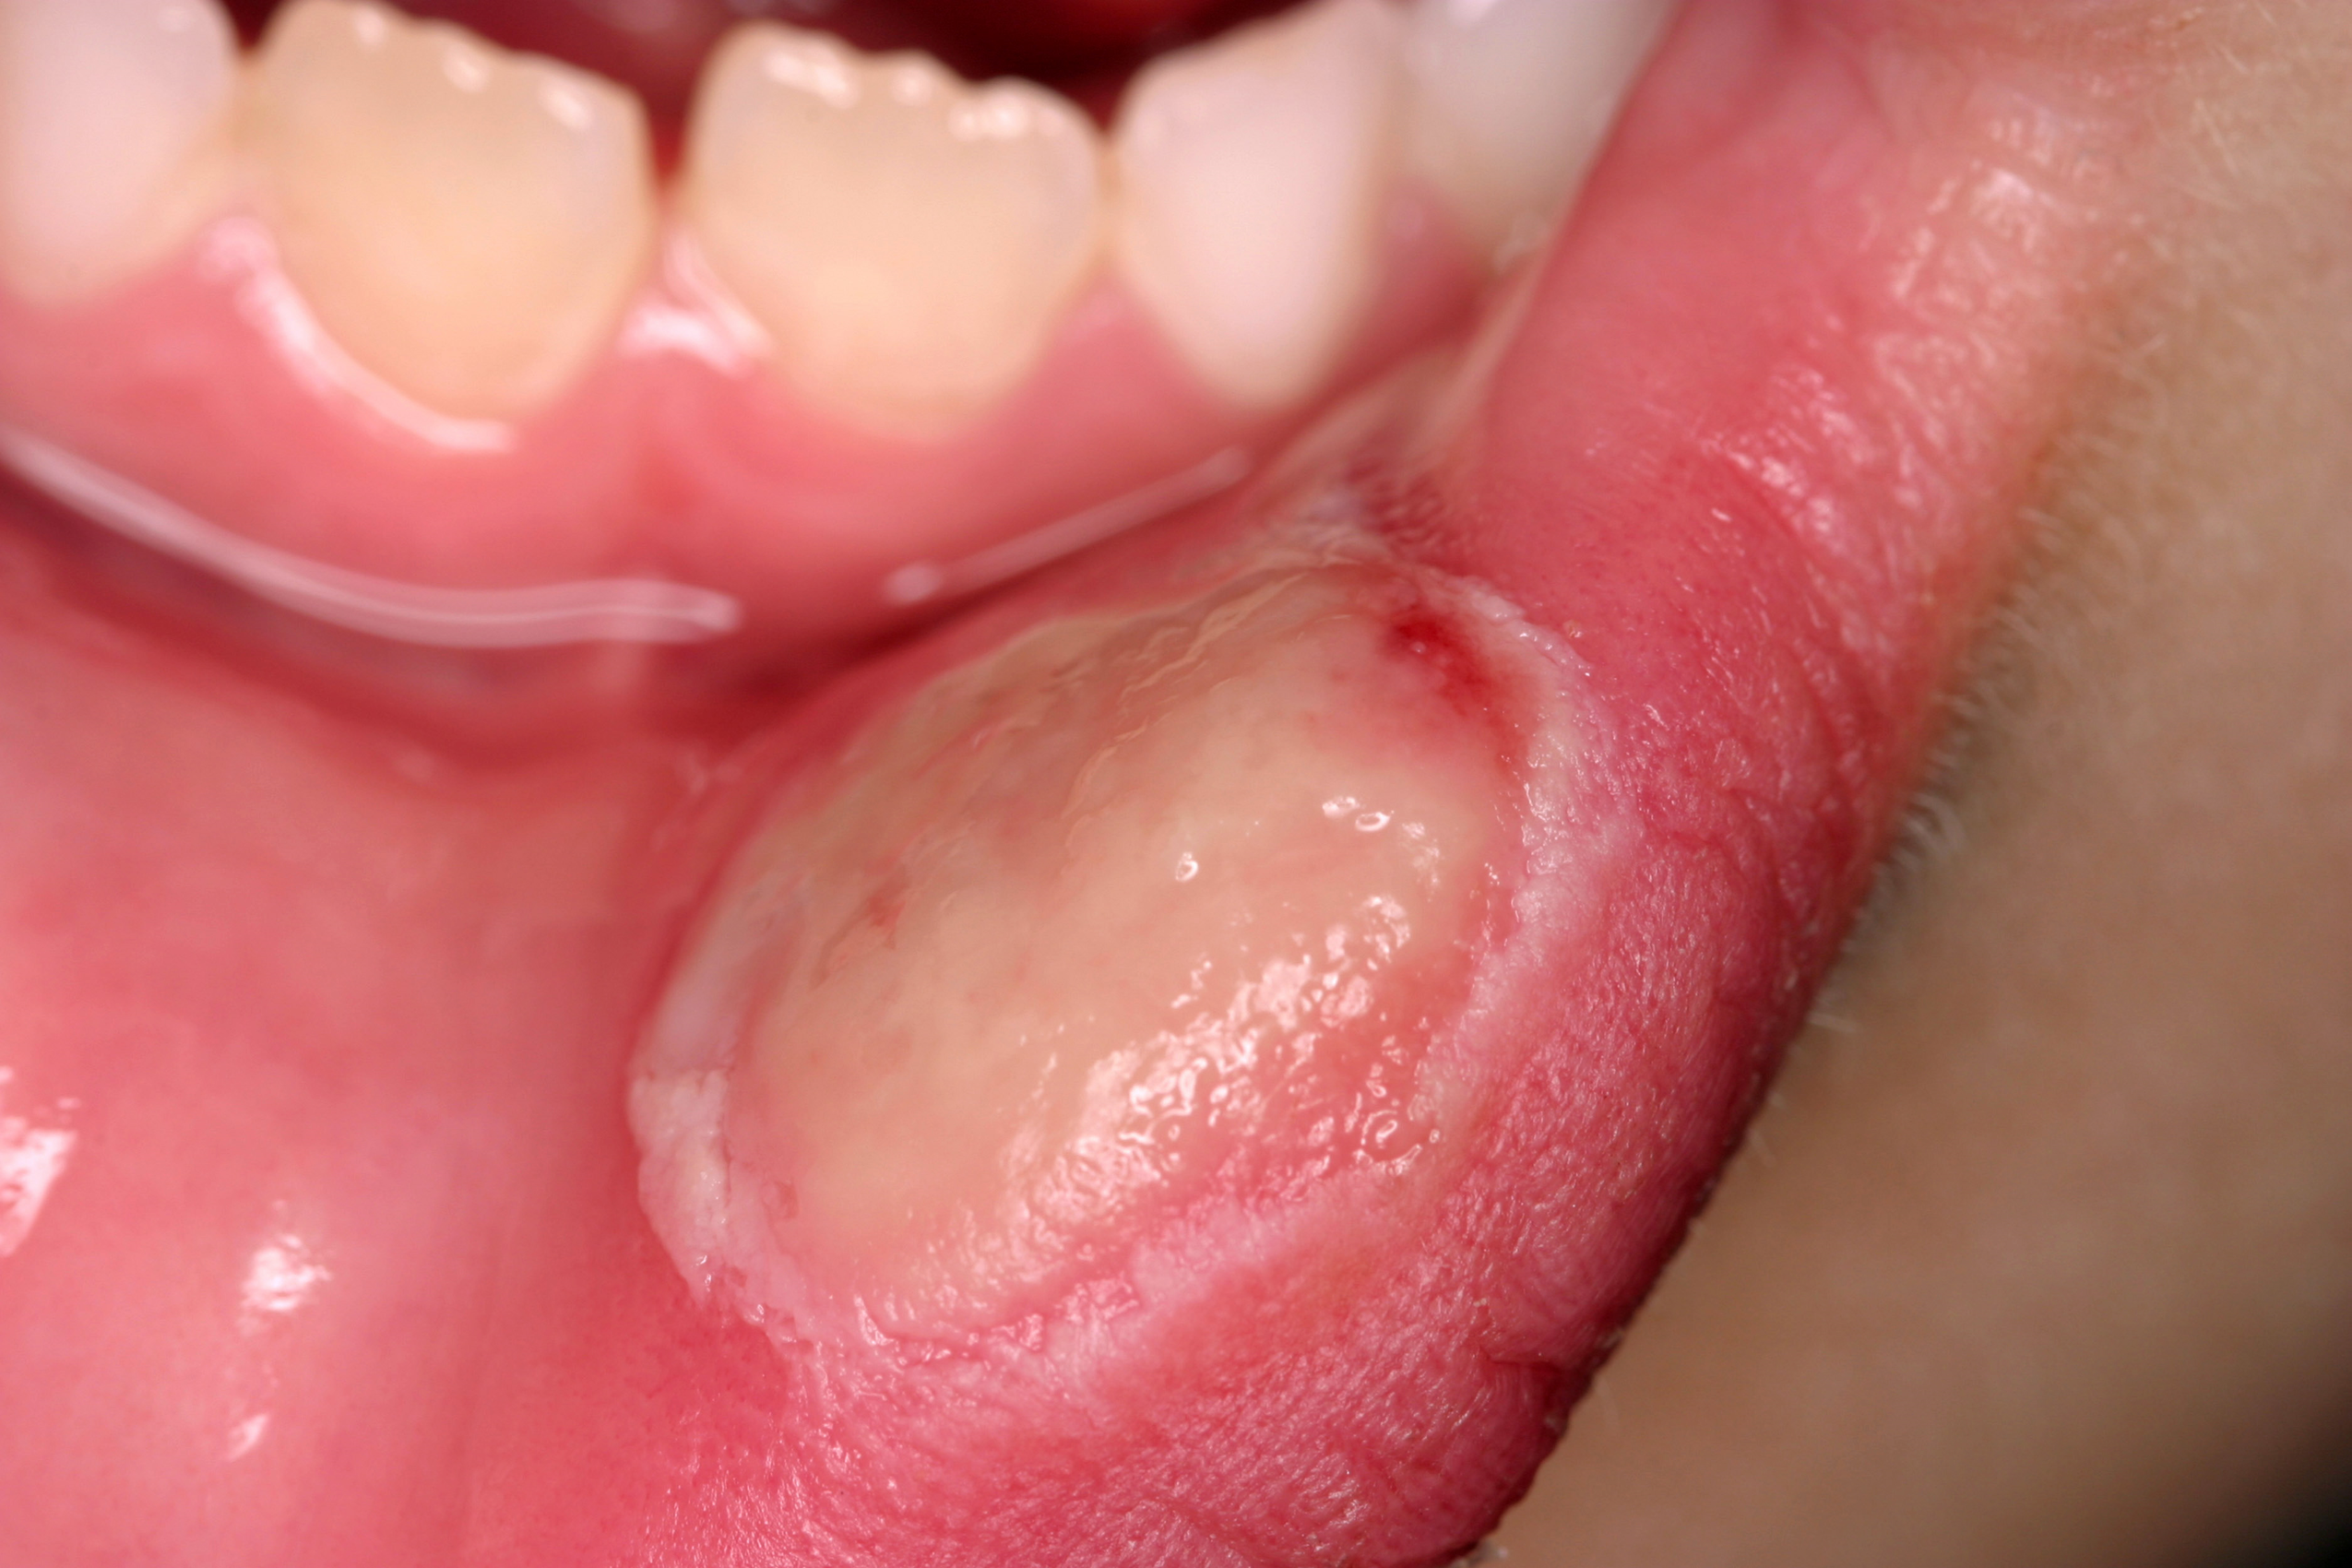 Hpv and mouth blisters. Human papillomavirus genital ulcers